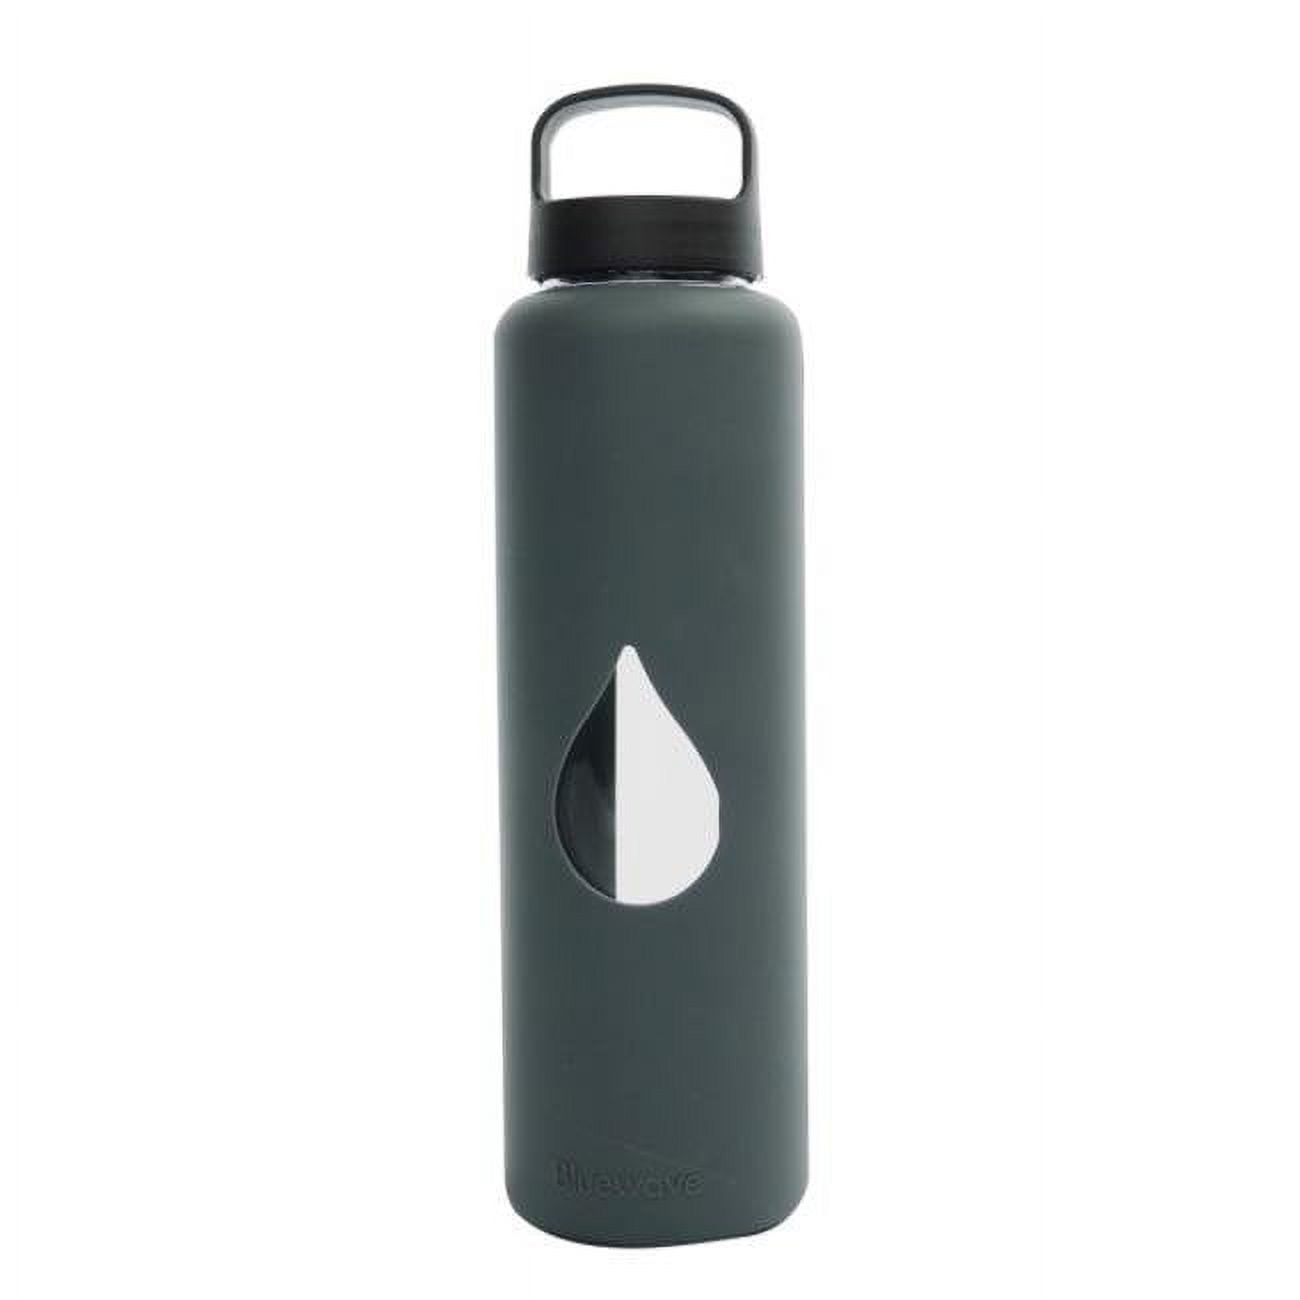 Gg150lc-grey 750ml Reusable Glass Water Bottle With Loop Cap And Free Silicone Sleeve - Graphite